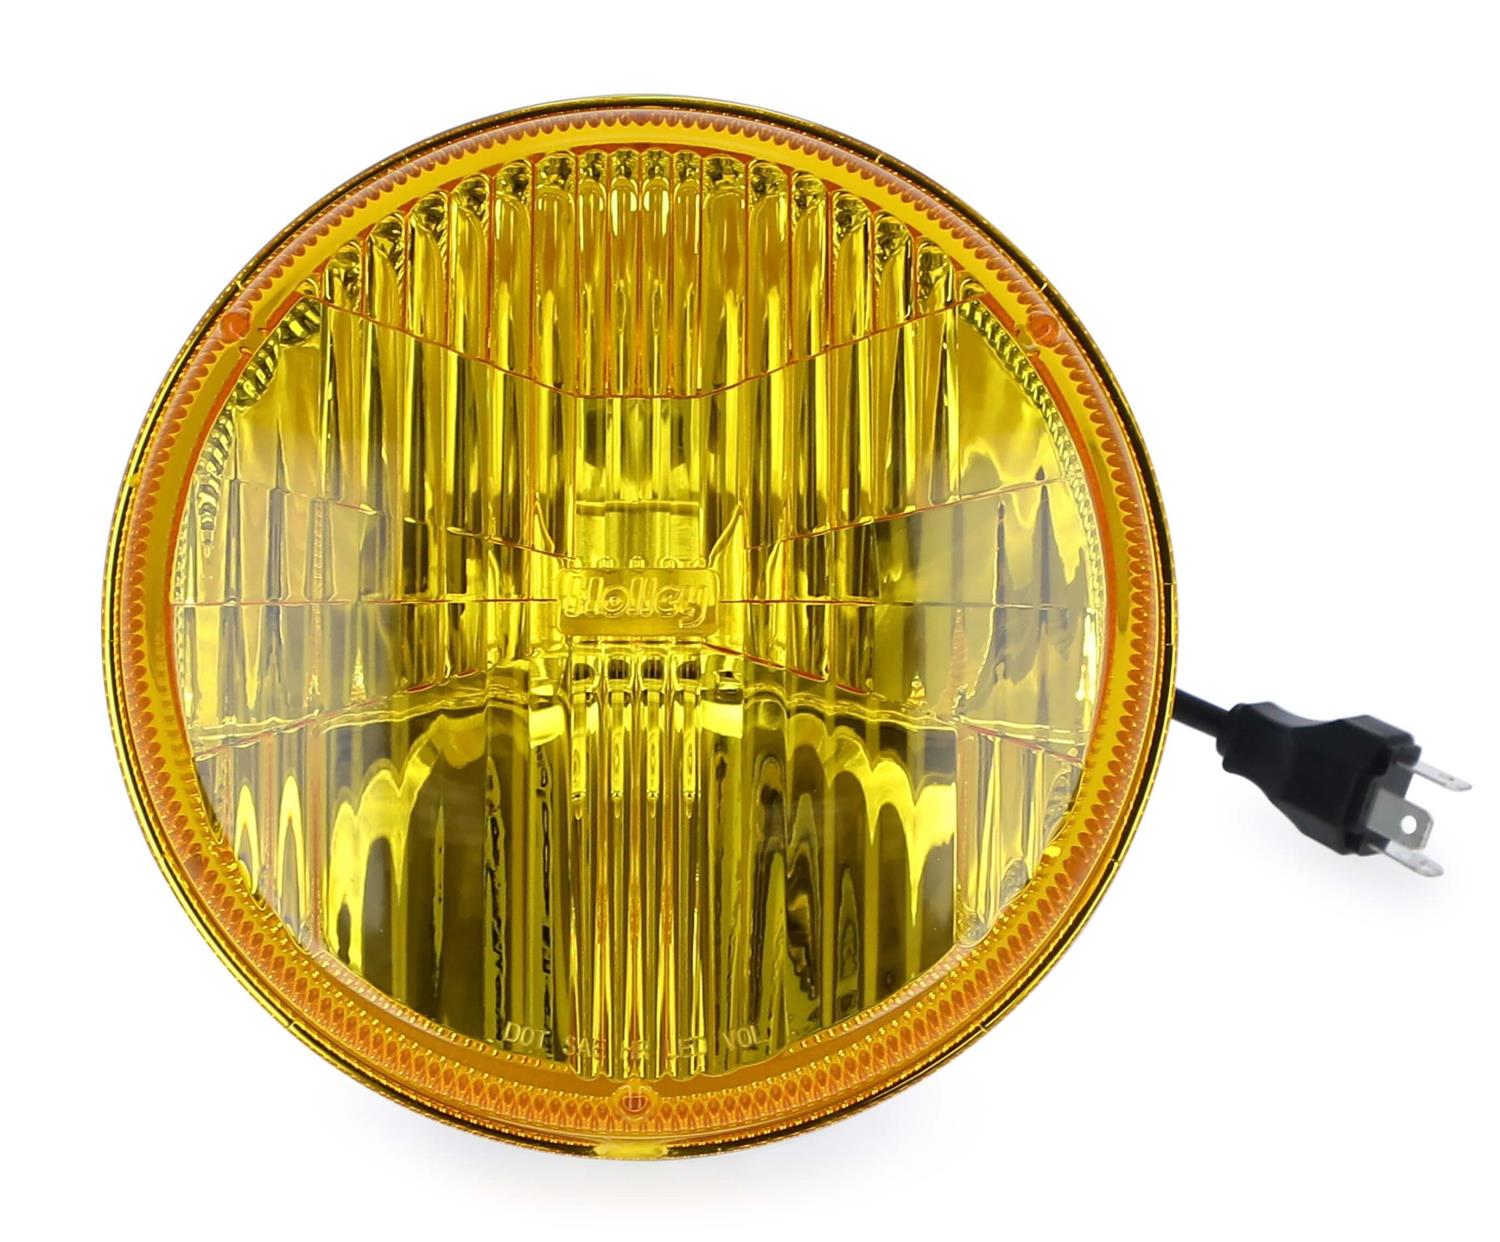 LFRB115 RetroBright LED 7 in. Round Headlight for